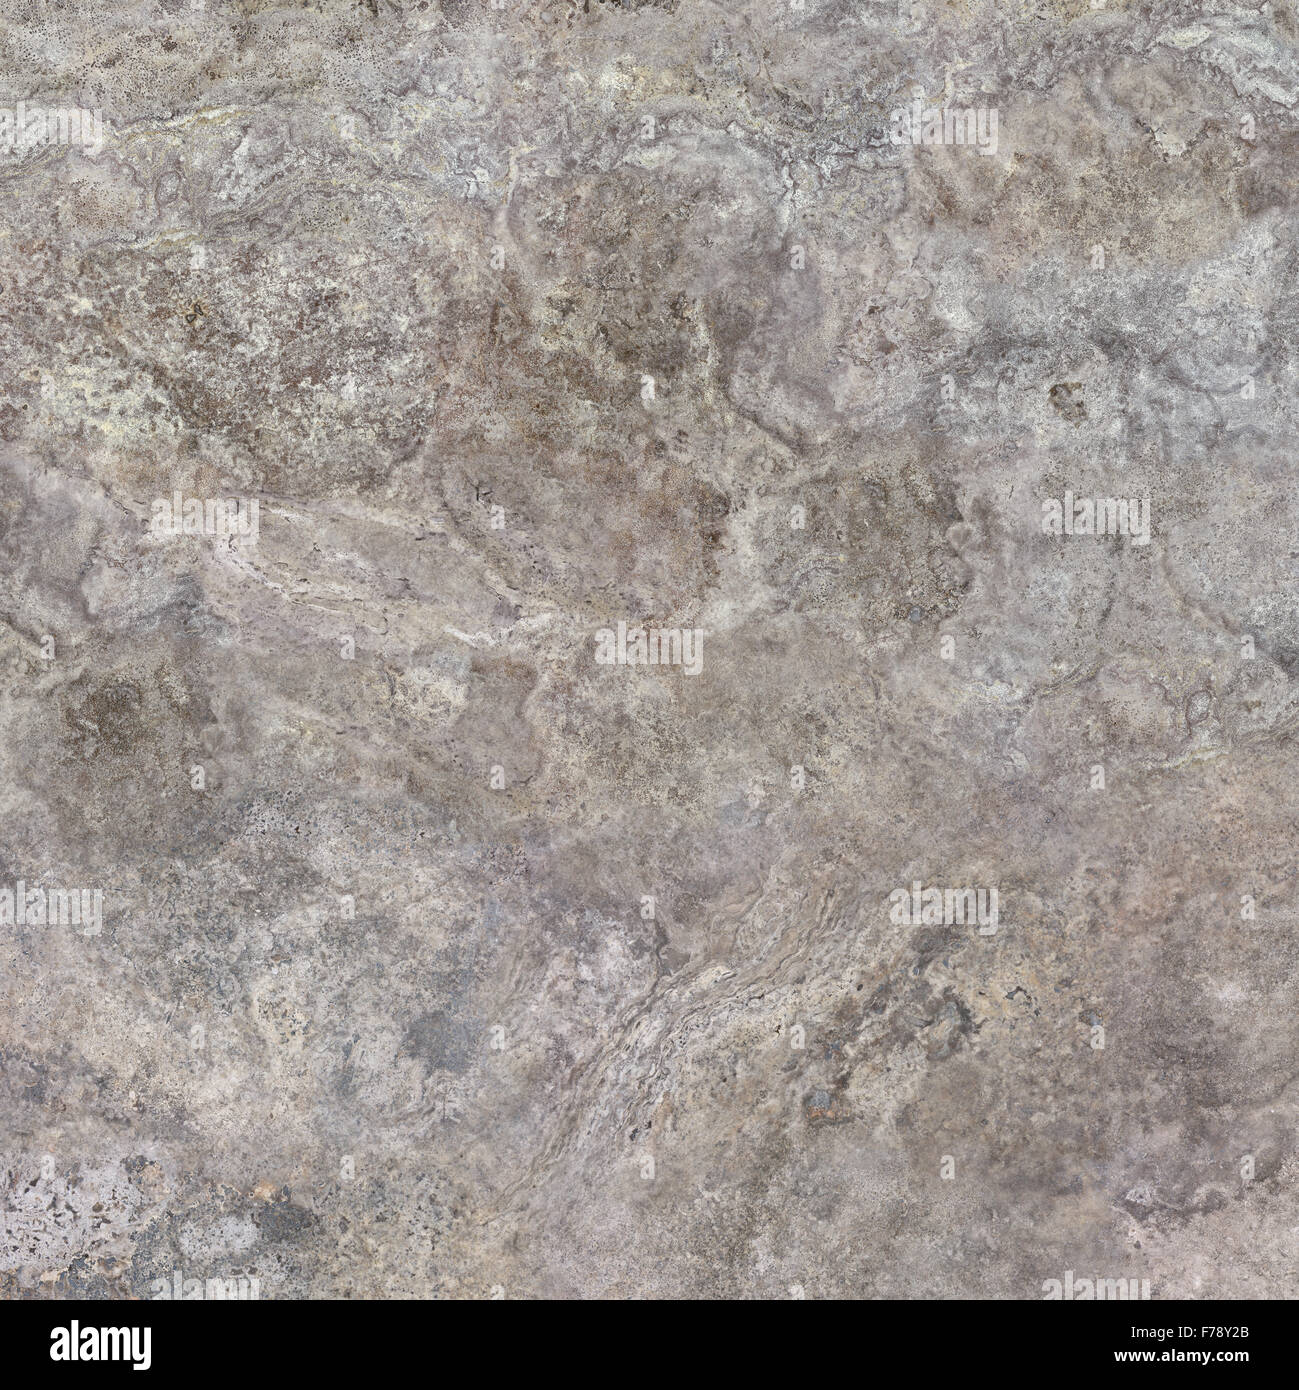 Grey travertine natural stone texture background. Approximately 6 by 6 foot area. Stock Photo